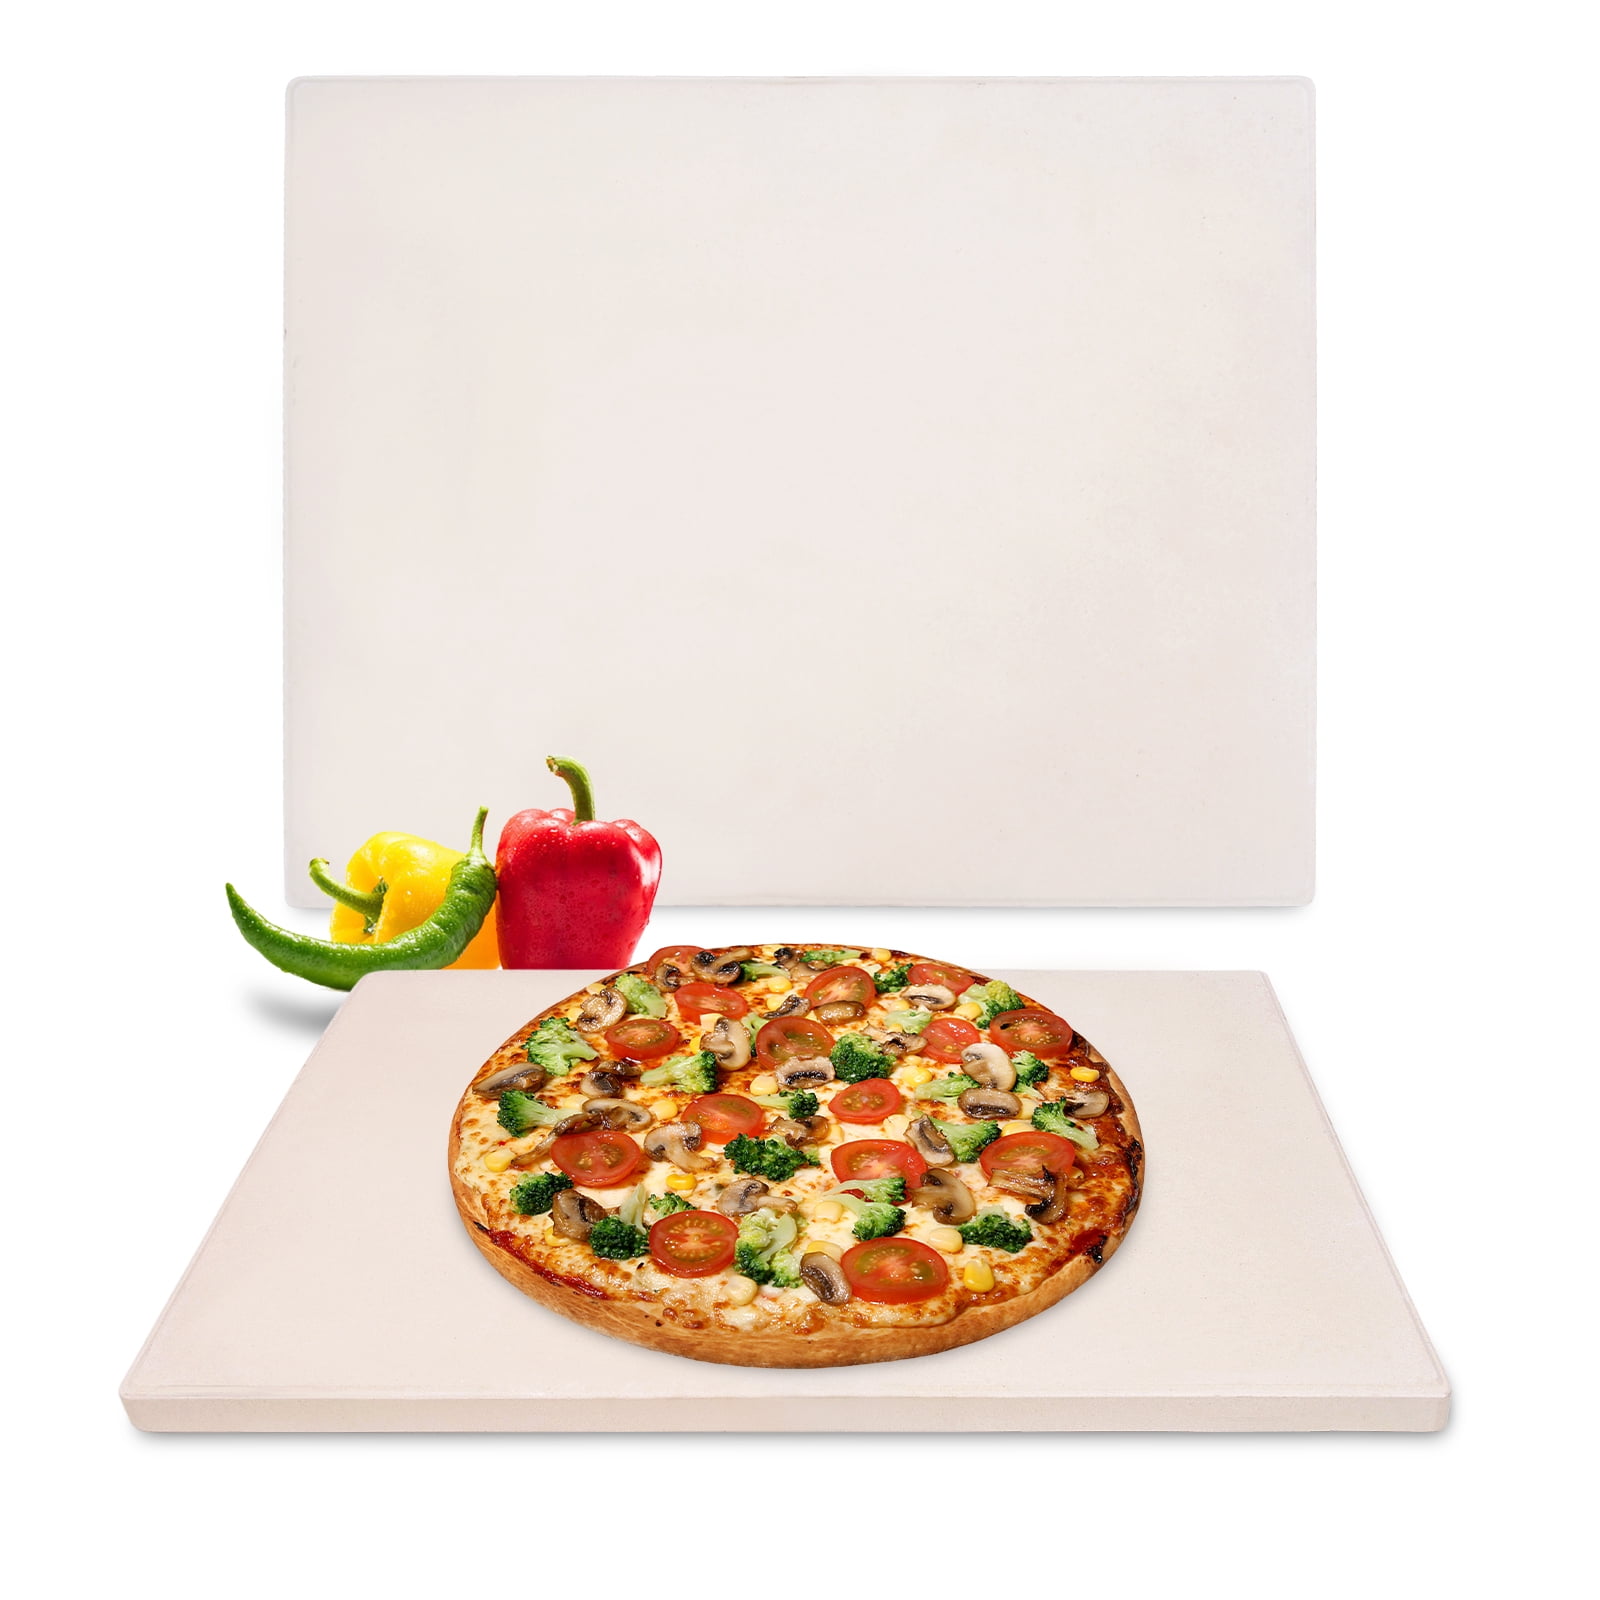 Pizza Stone - Baking Stone for 12 Outdoor Pizza Oven, Grill, Barbecue  Square 12 Pizza Stone 12.4 x 12.6 x 0.6 Baking Pan